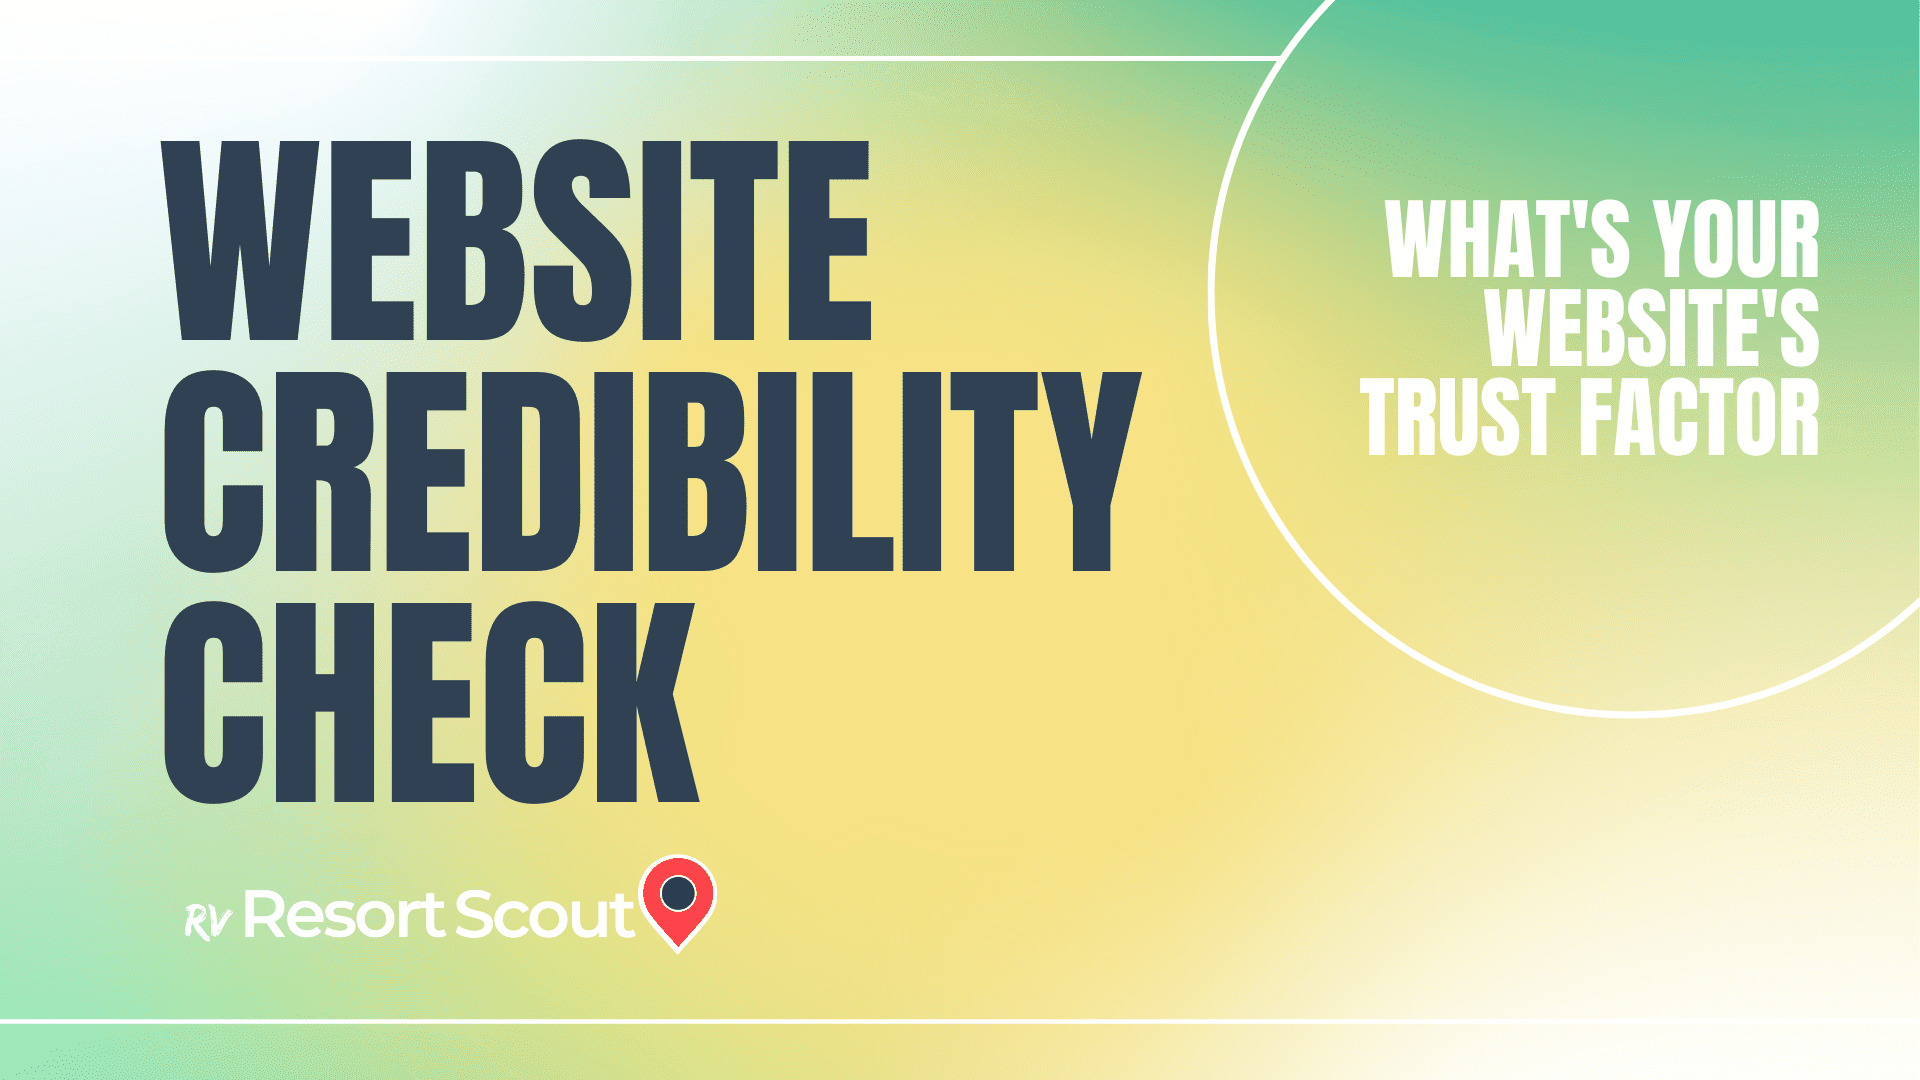 Website Credibility Check: What's Your Websites Trust Factor